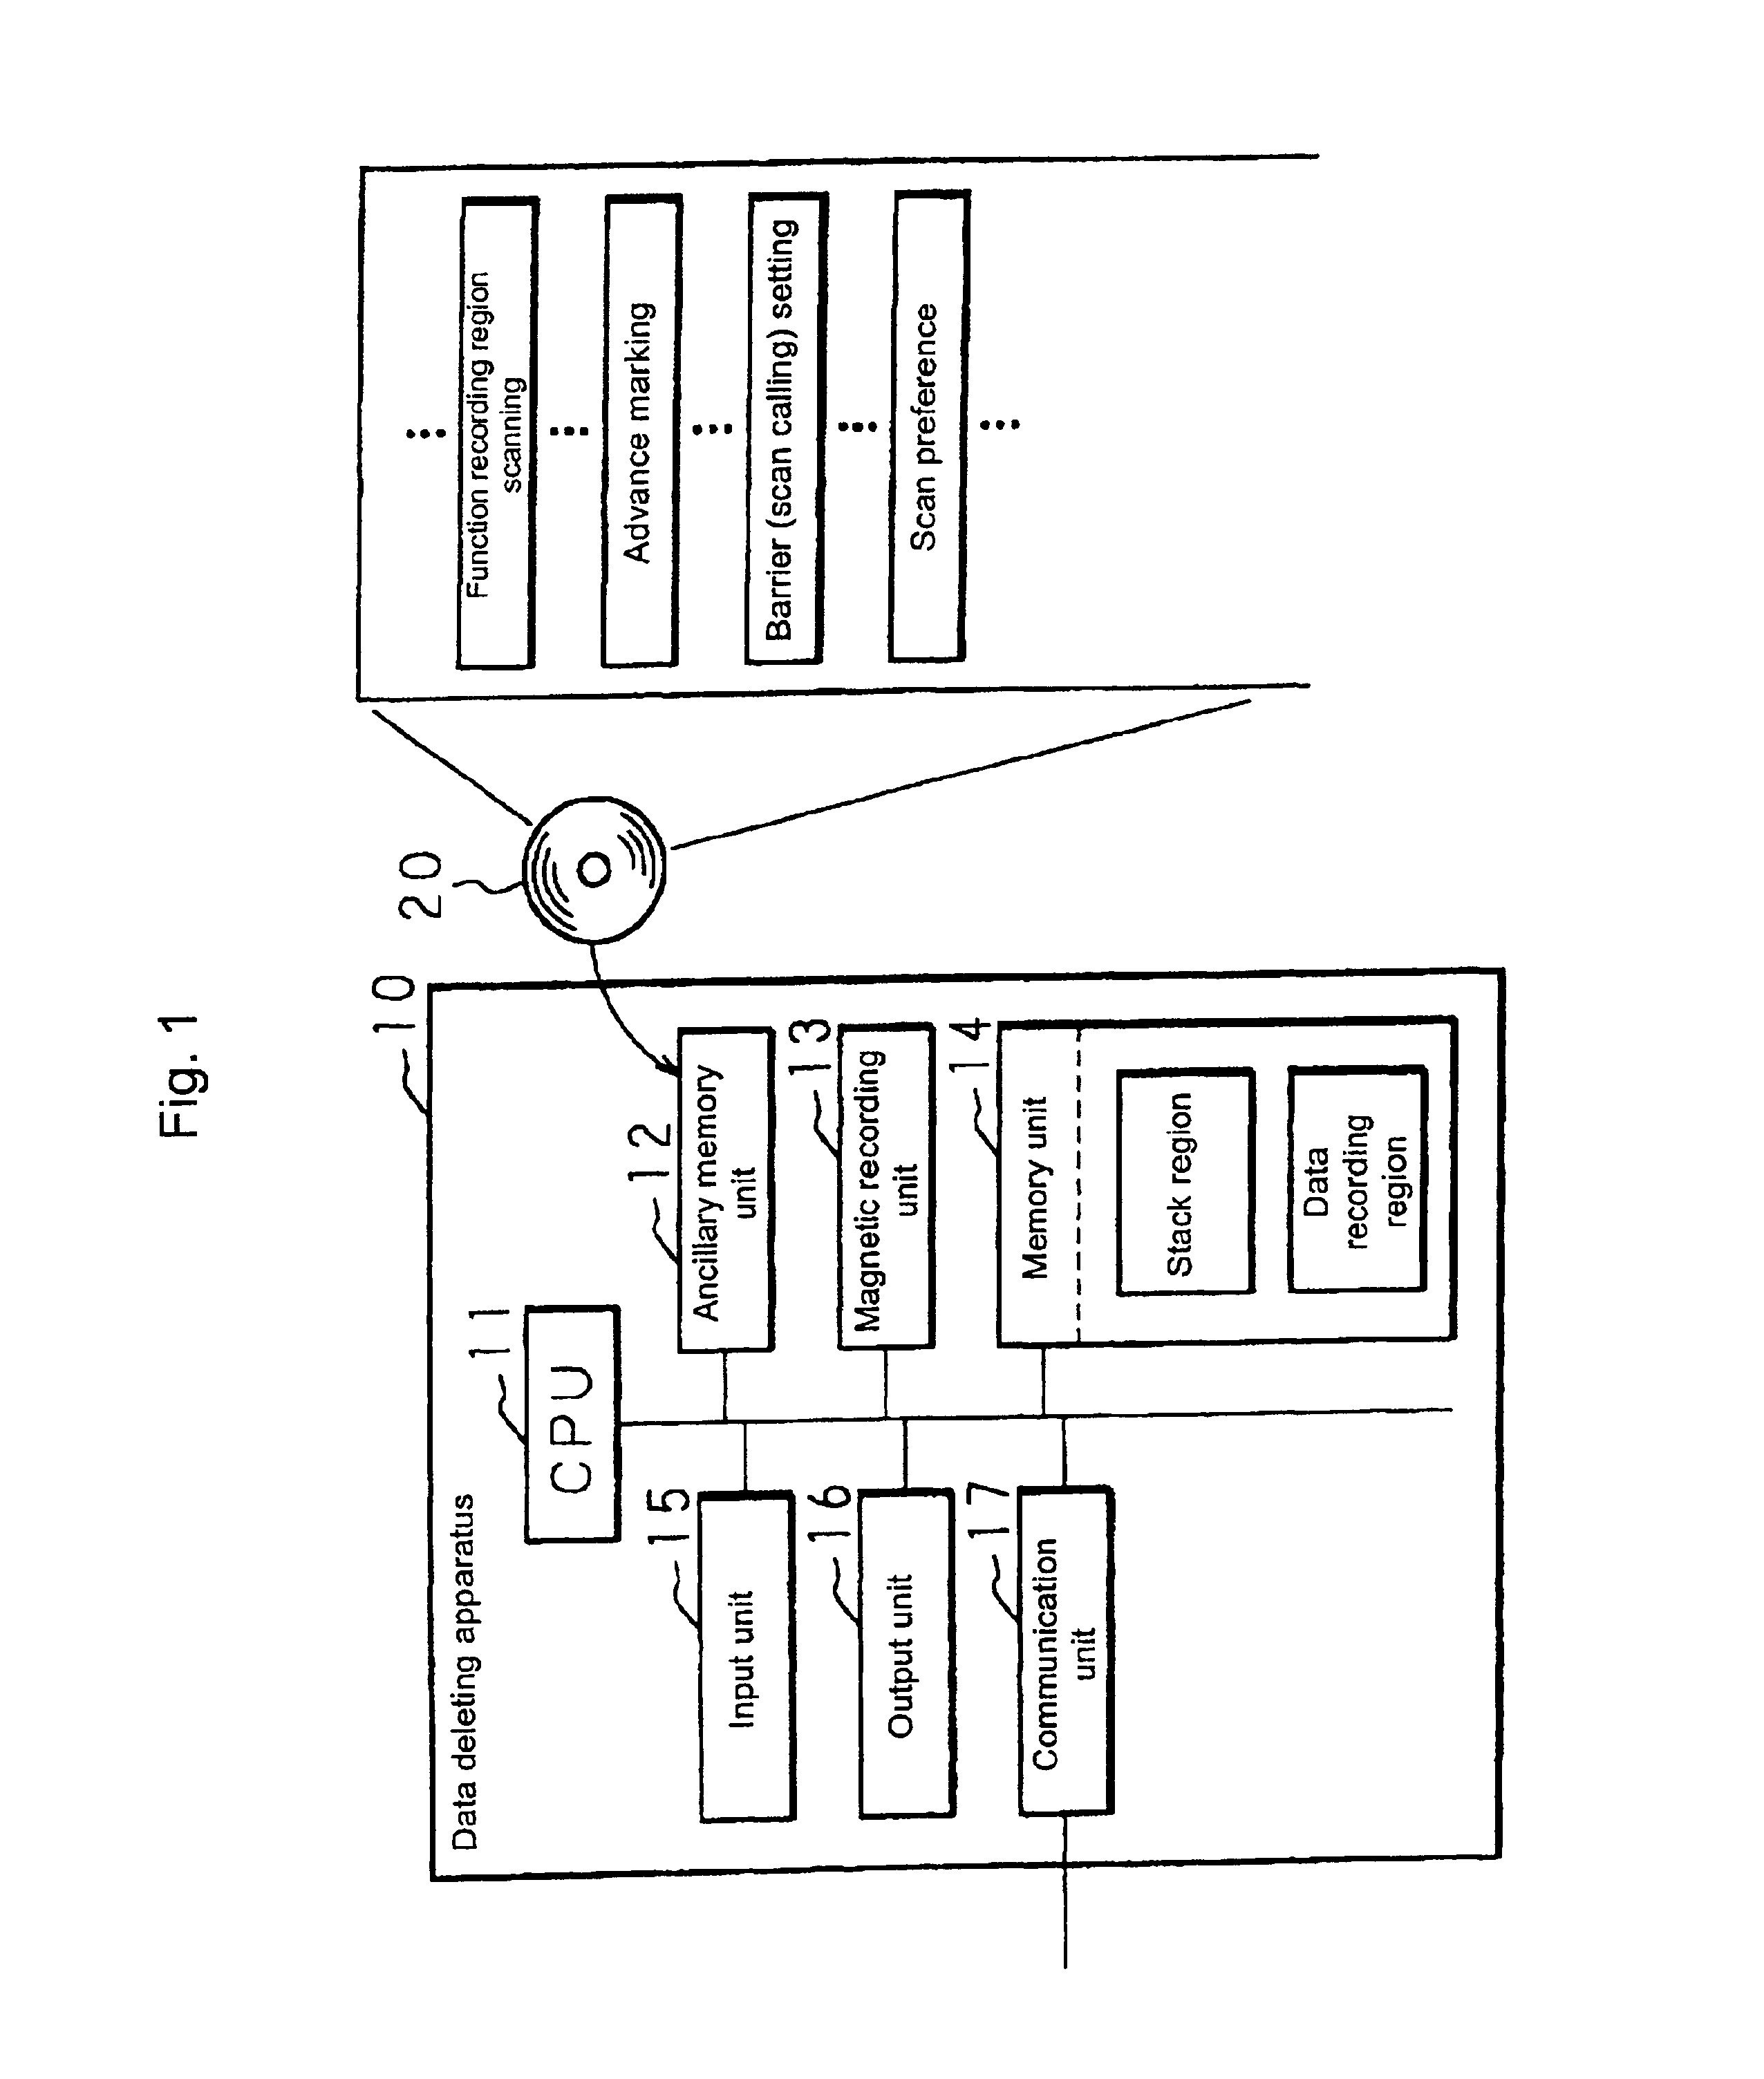 Method and apparatus for garbage collection using advanced marking techniques and restricted barrier to protect the data